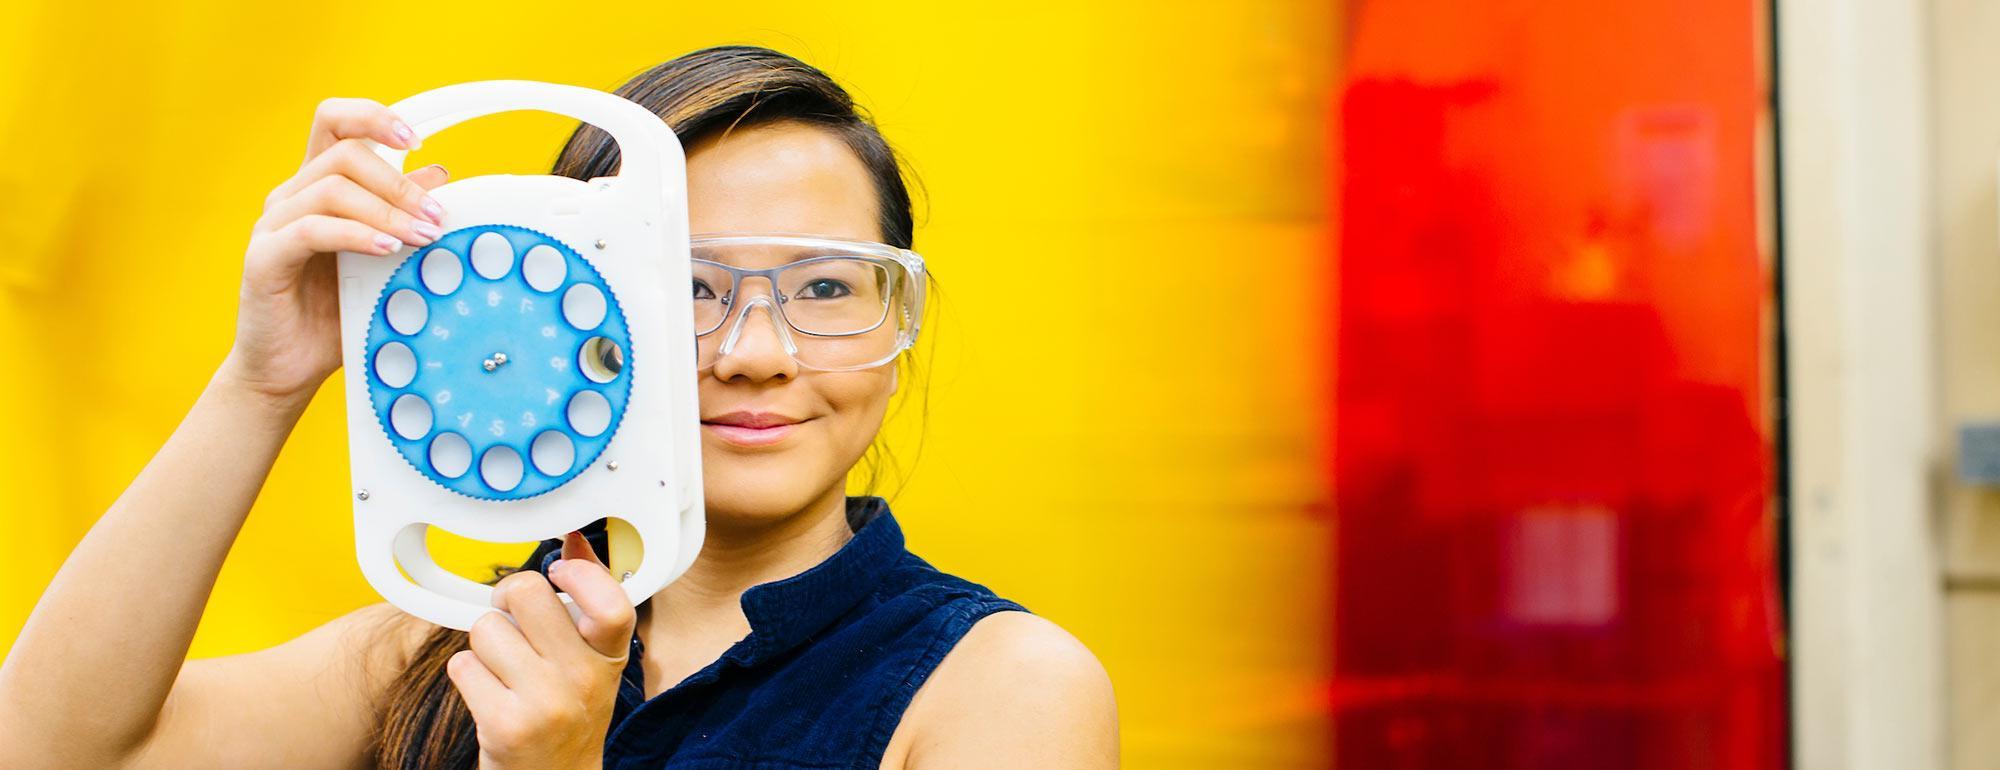 A student poses with her optomalogic invention